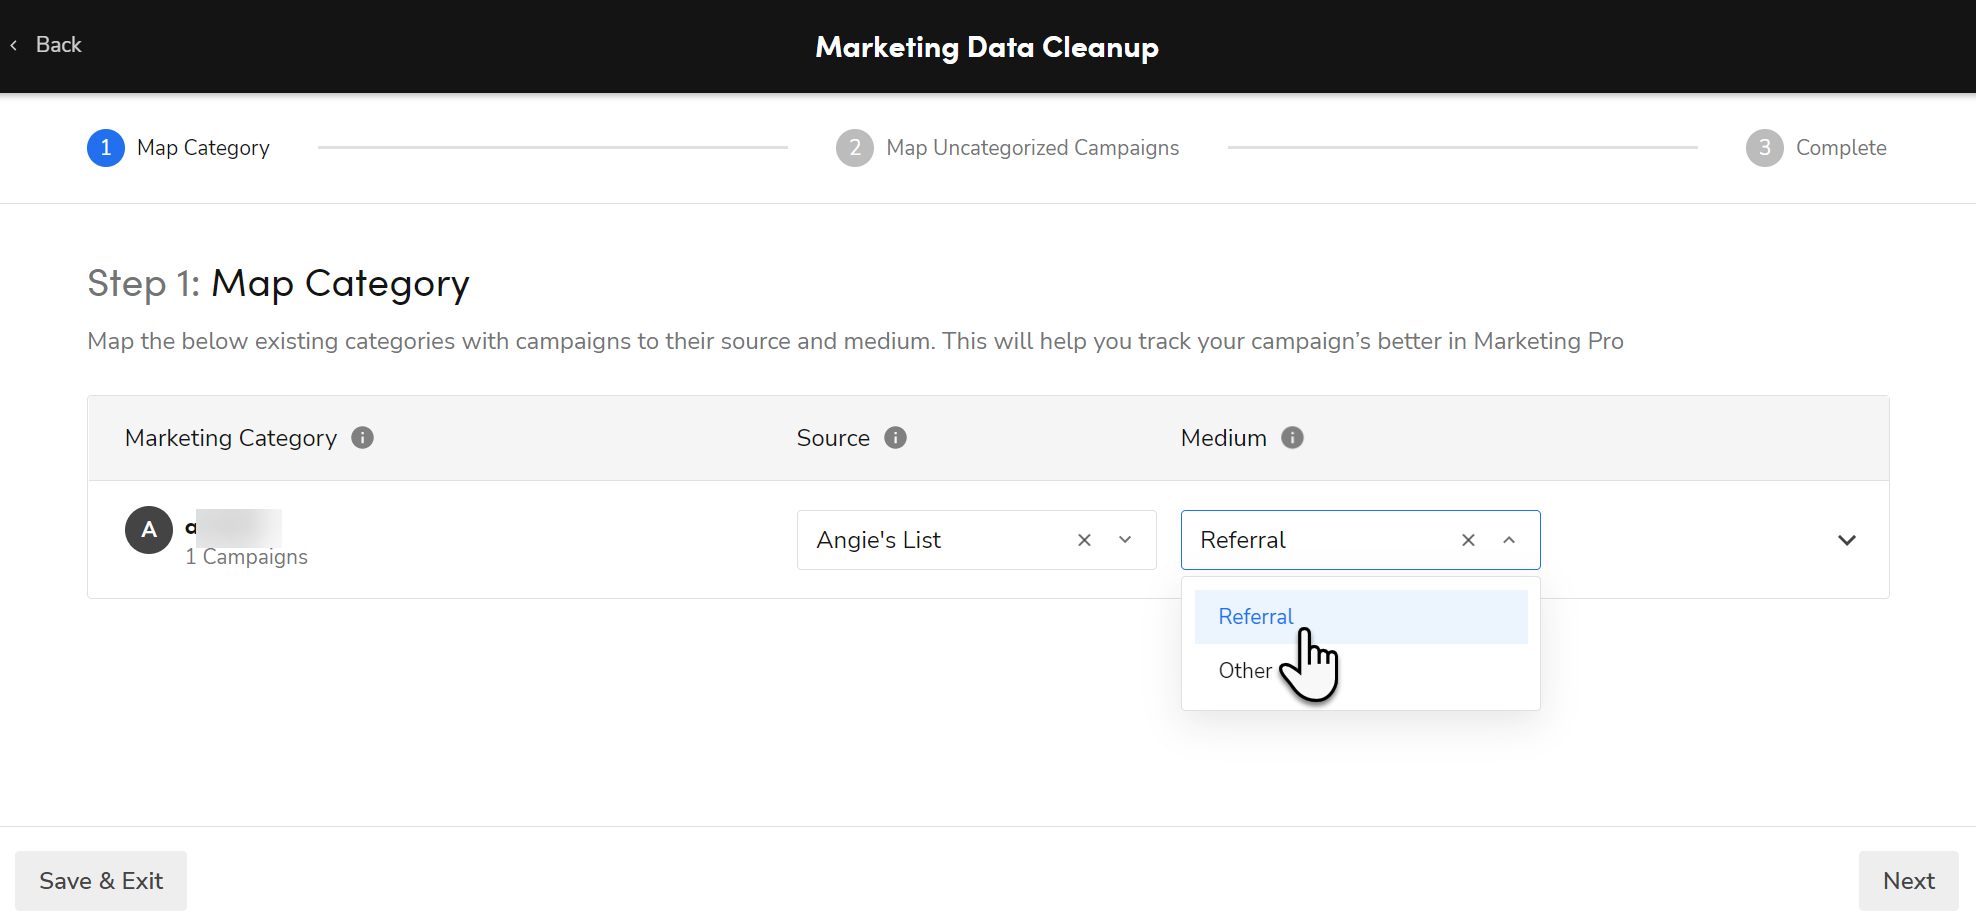 Step 1: Map Category in marketing campaign data